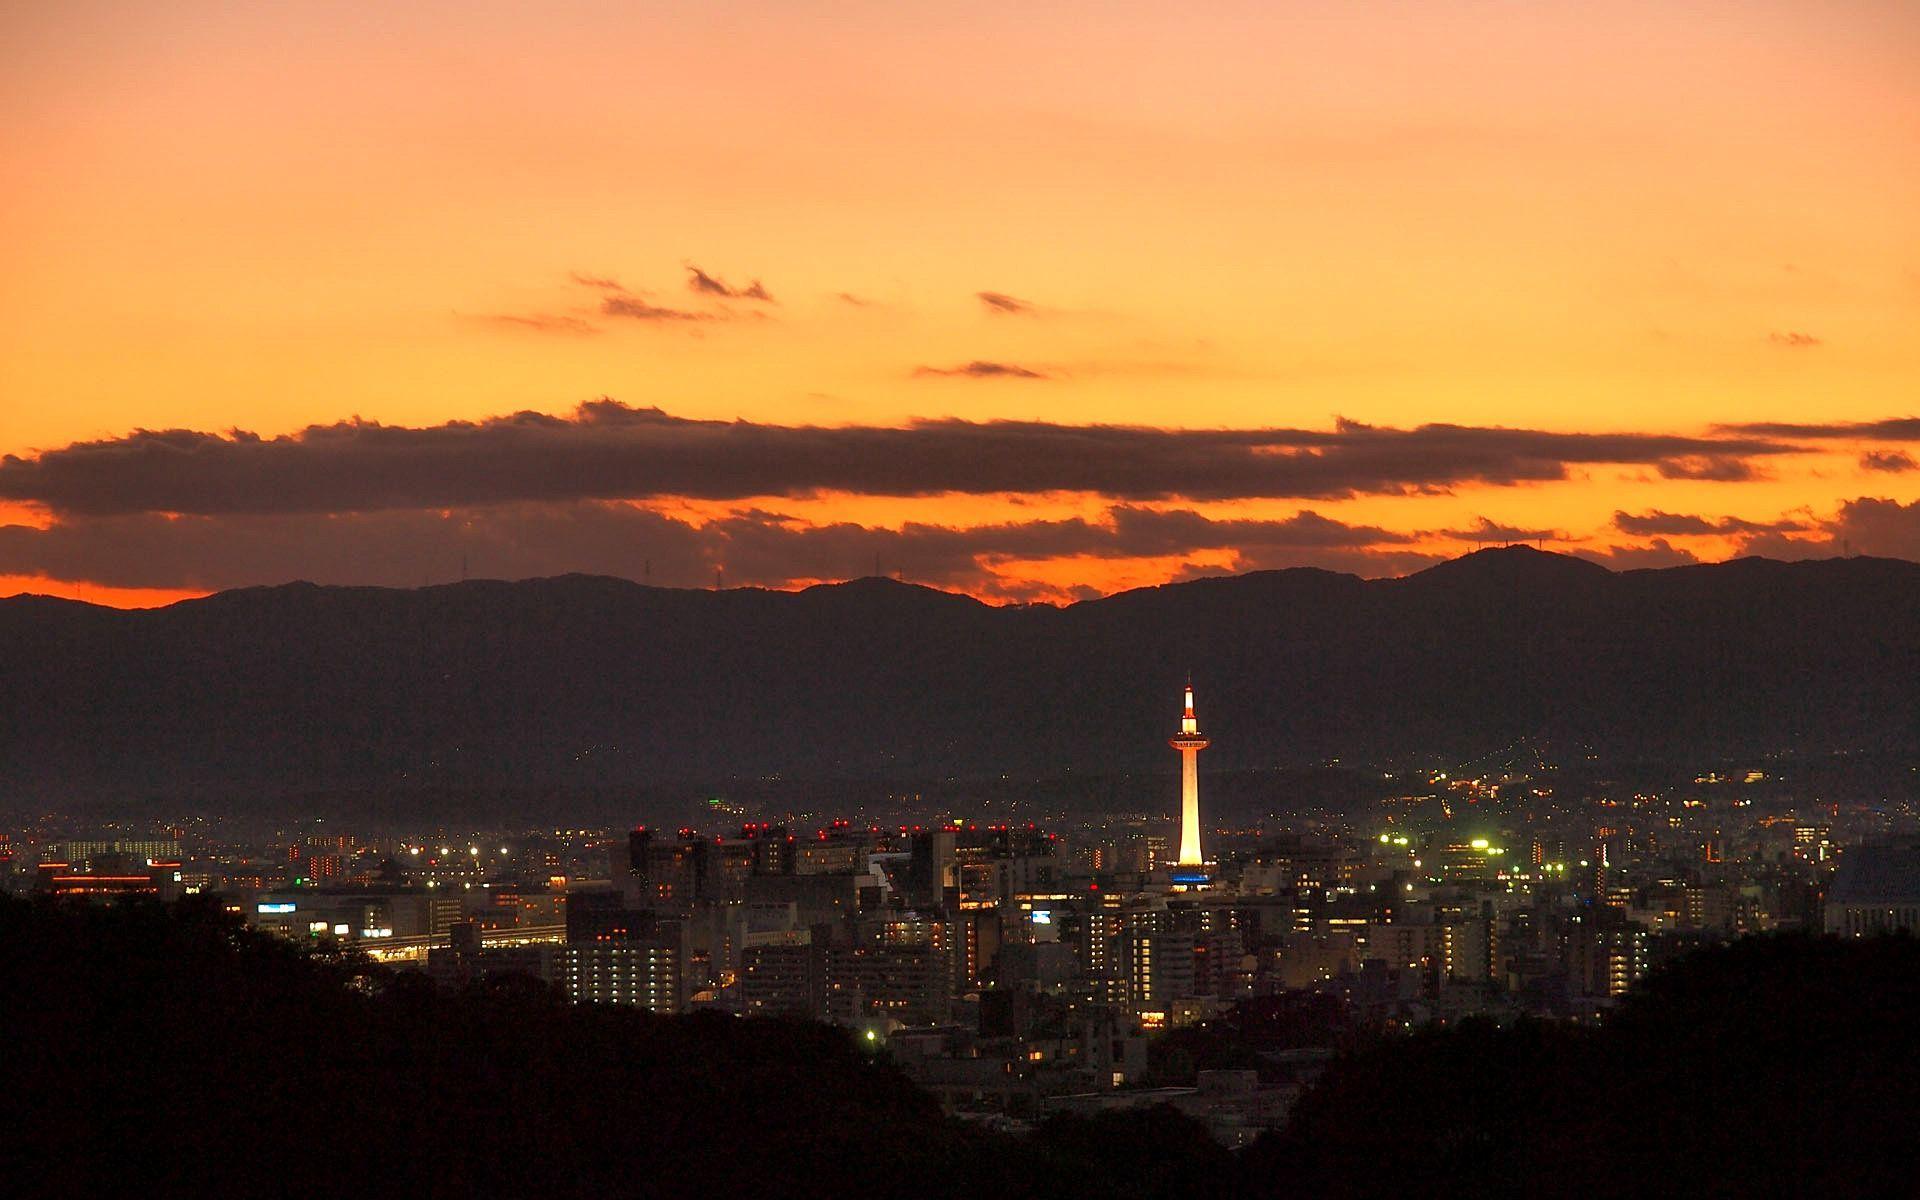 Japanese Sunset Hd Wallpapers - Top Free Japanese Sunset Hd Backgrounds